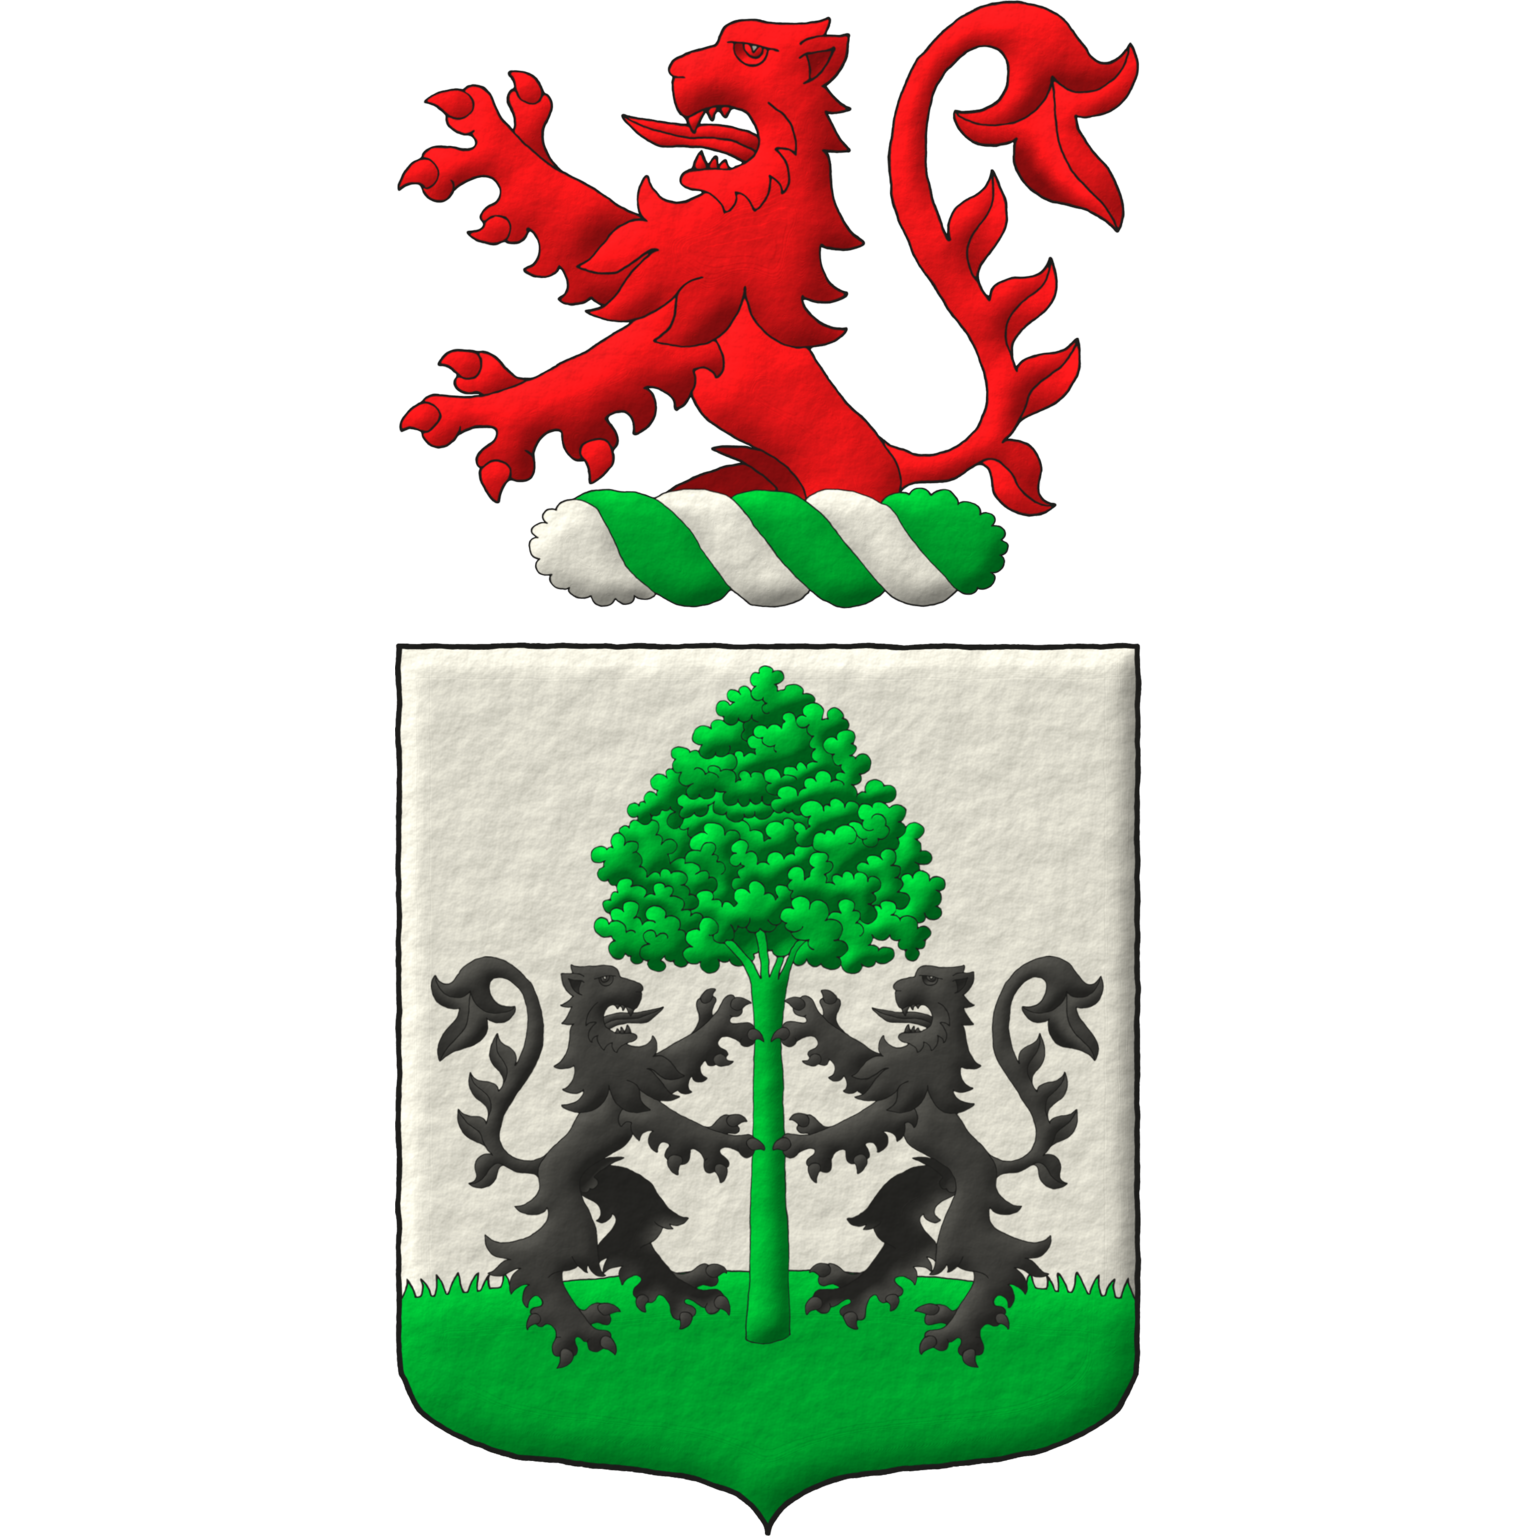 Argent, on a terrace in base a tree Vert between two lions Sable steep on it. Crest: On a wreath Argent and Vert, a demi-lion Gules.